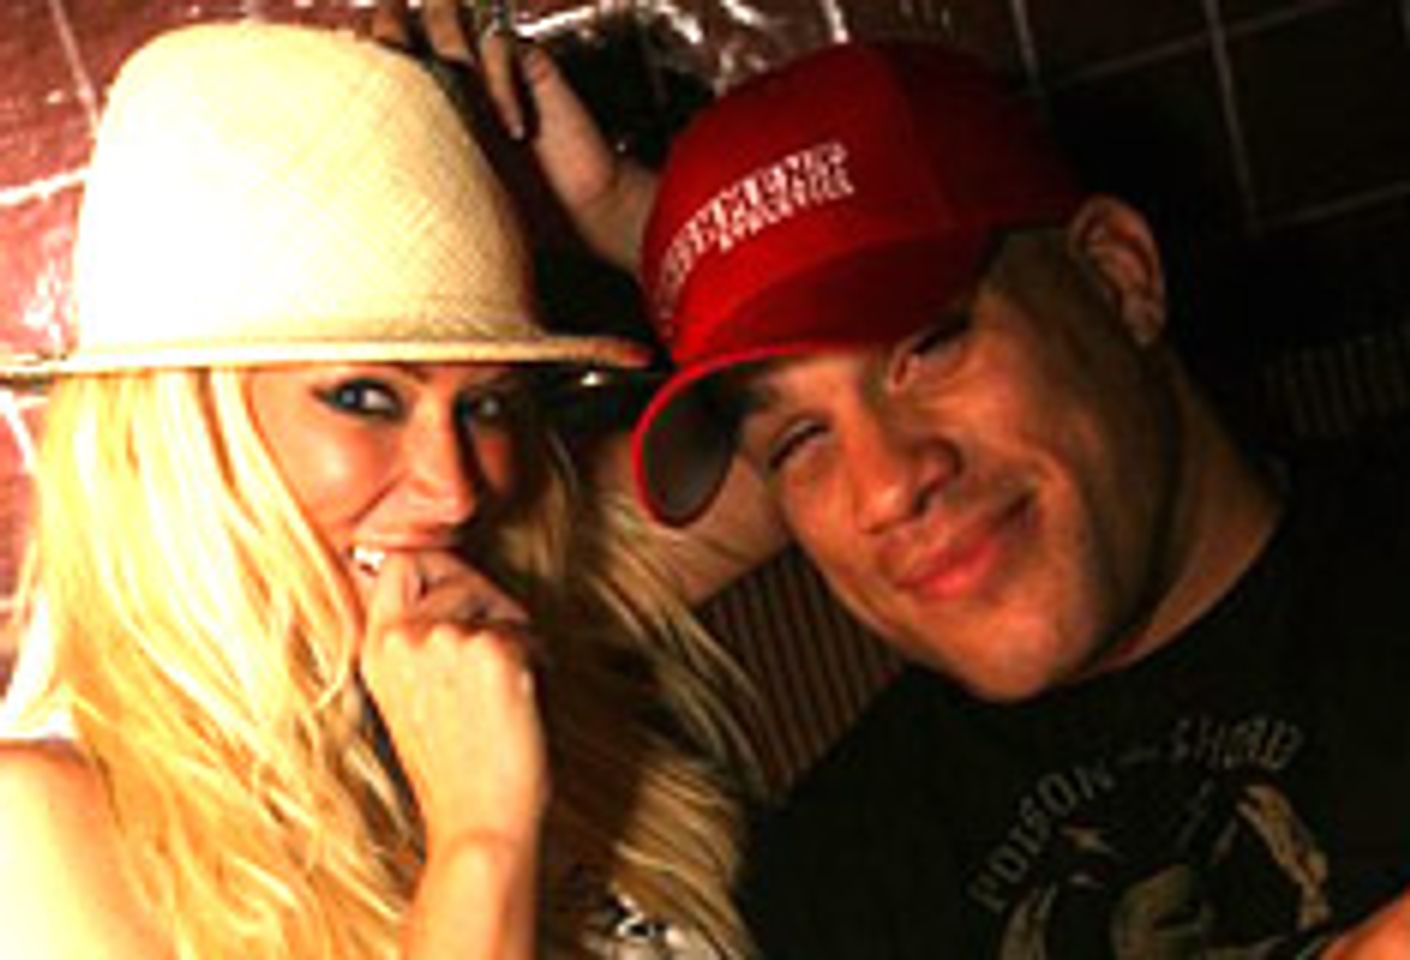 Jenna Parties with UFC Fighter Tito Ortiz